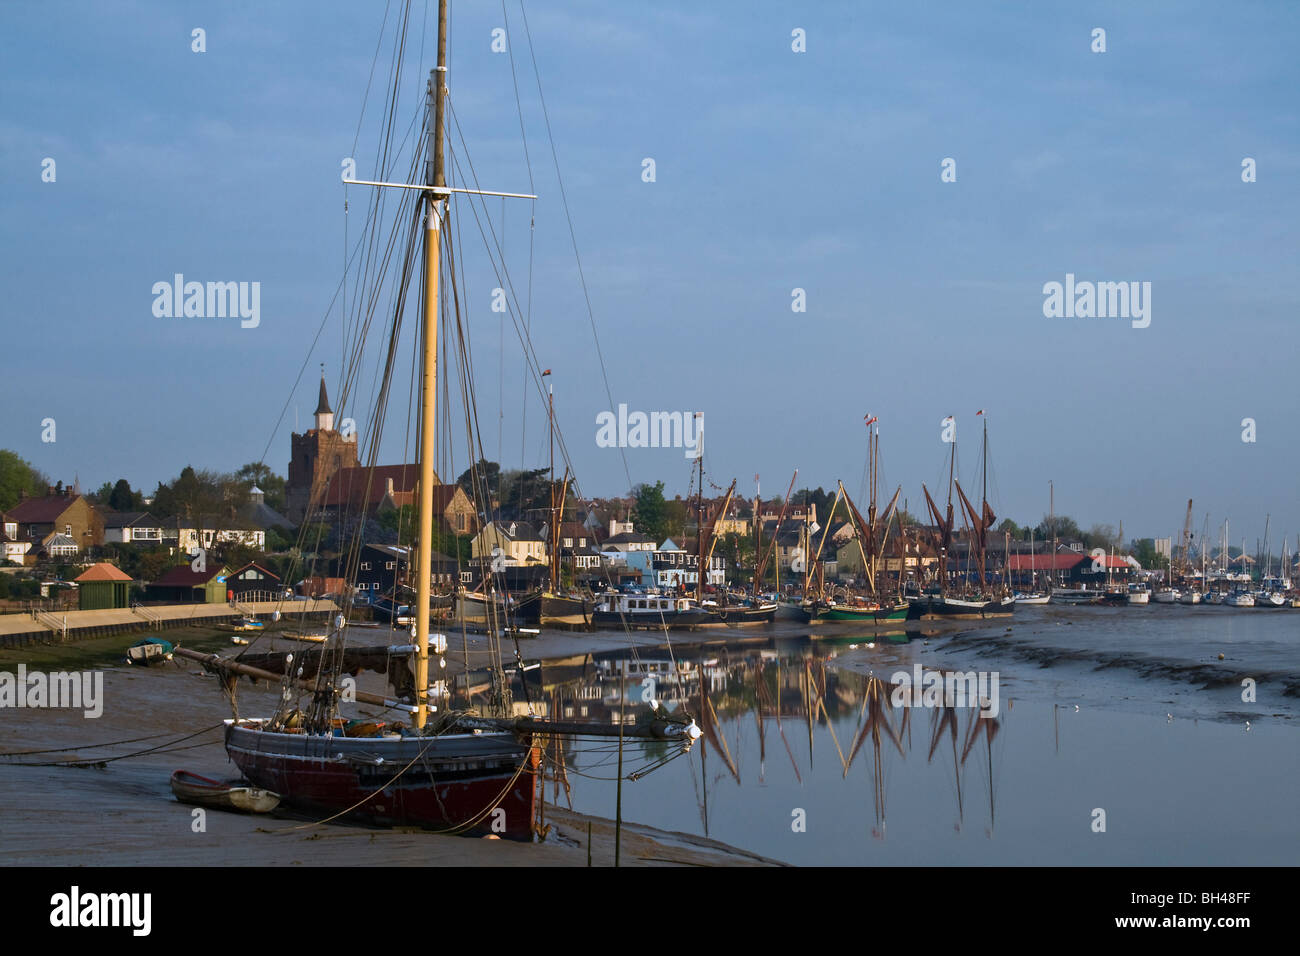 Oyster smack with the promenade of Maldon and Thames barges in the background. Stock Photo